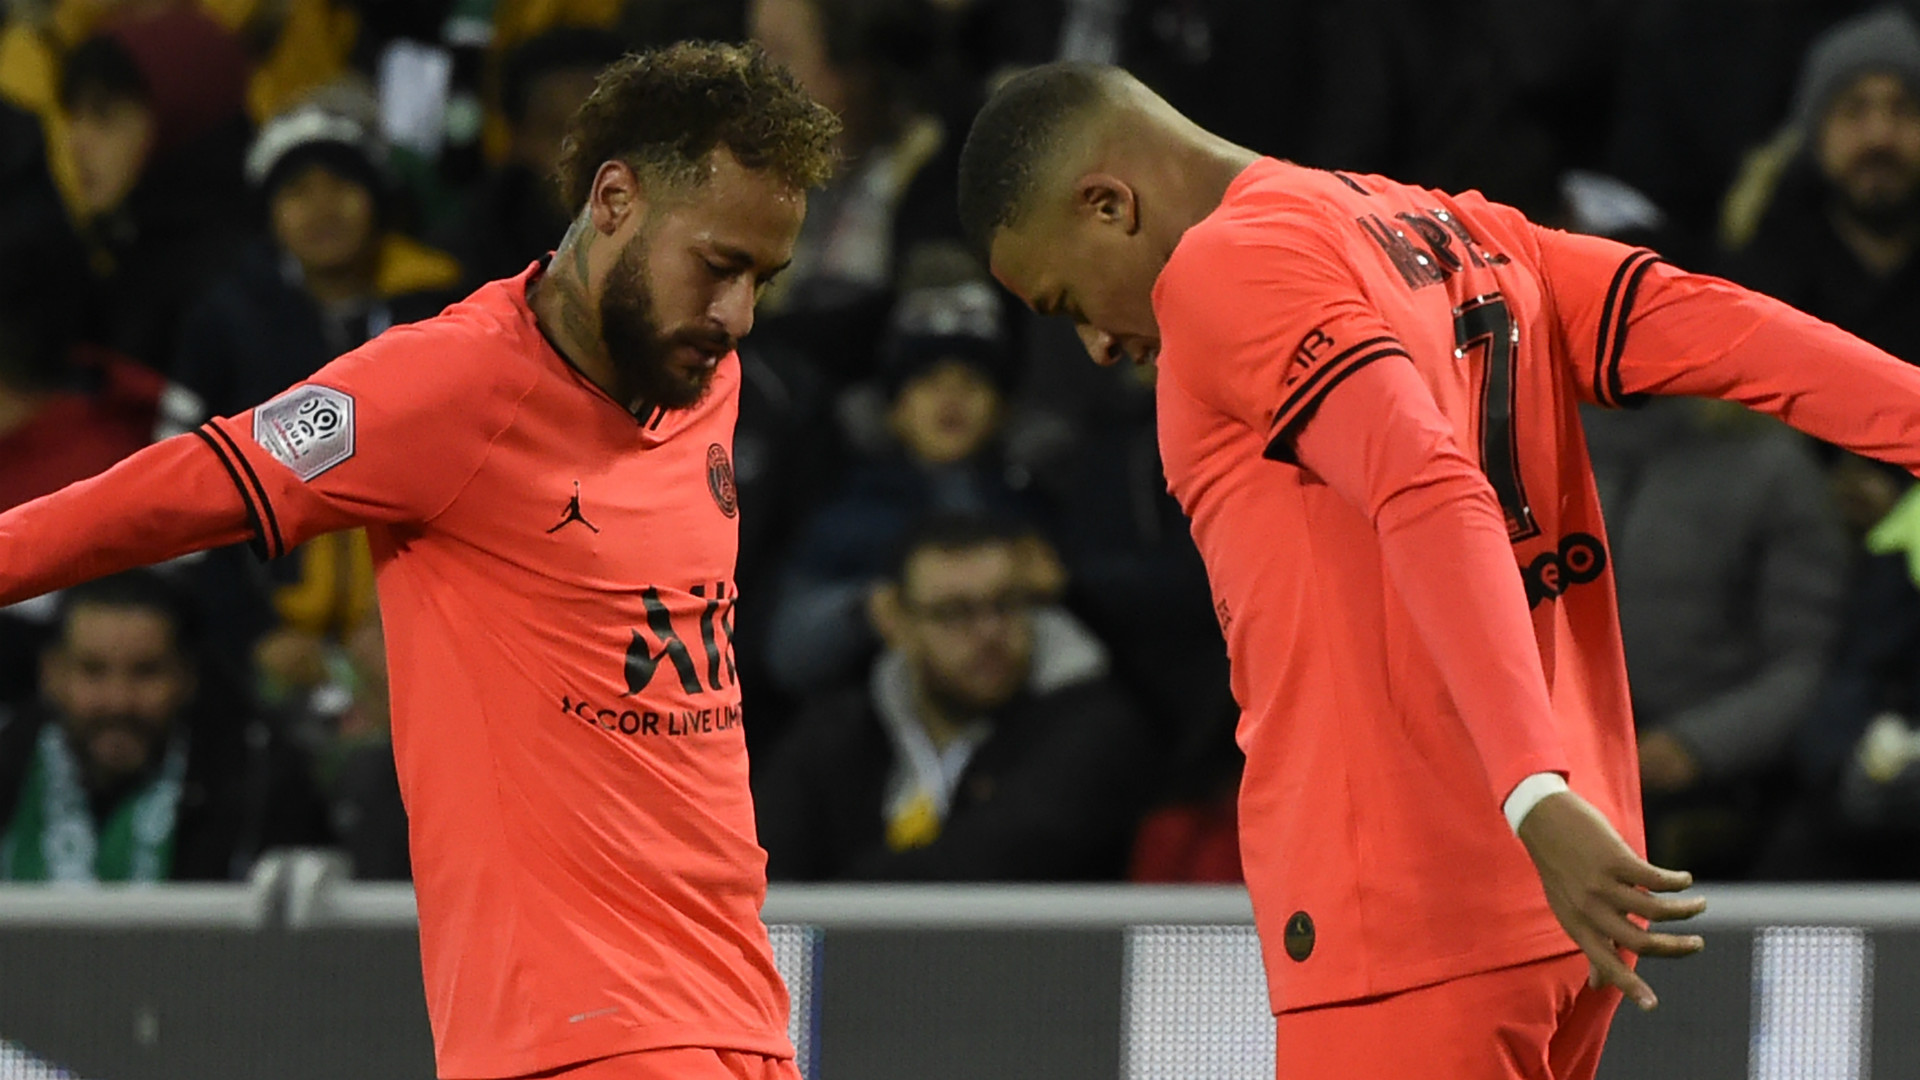 Neymar Was The Superstar' Dismisses Reports Of Rivalry With PSG Team Mate